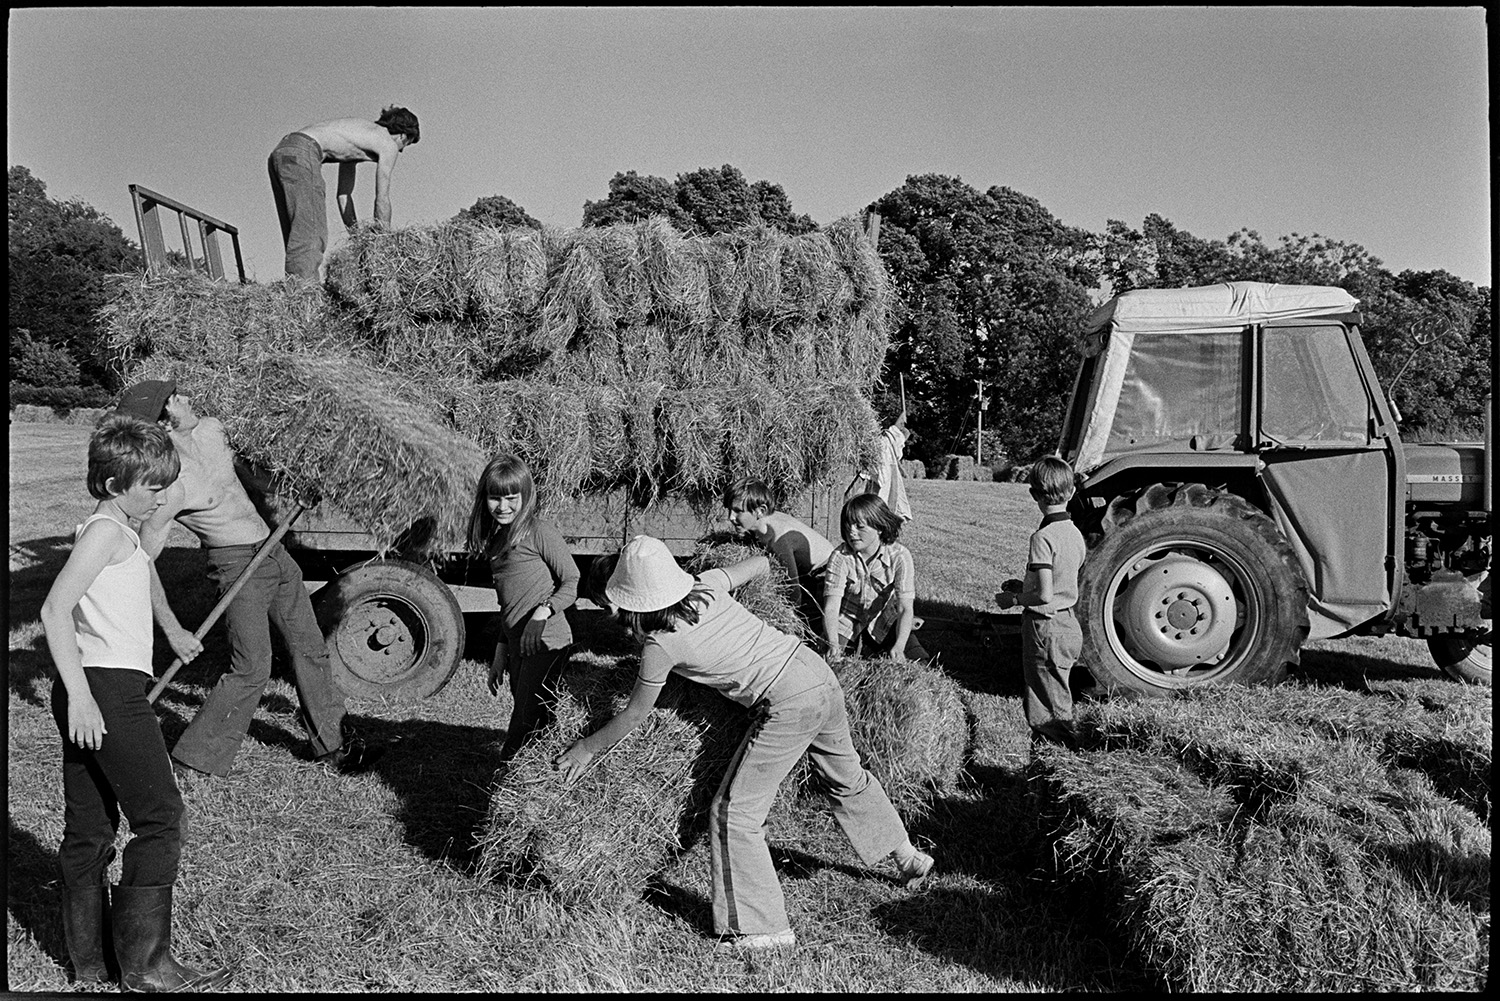 Baling hay with tractor. 
[Children helping Graham Ward and David Ward moving hay bales and load them onto a trailer in a field at Parsonage, Iddesleigh, possibly as part of the Farms for City Children initiative. One of the men is moving a hay bale with a pitchfork.]